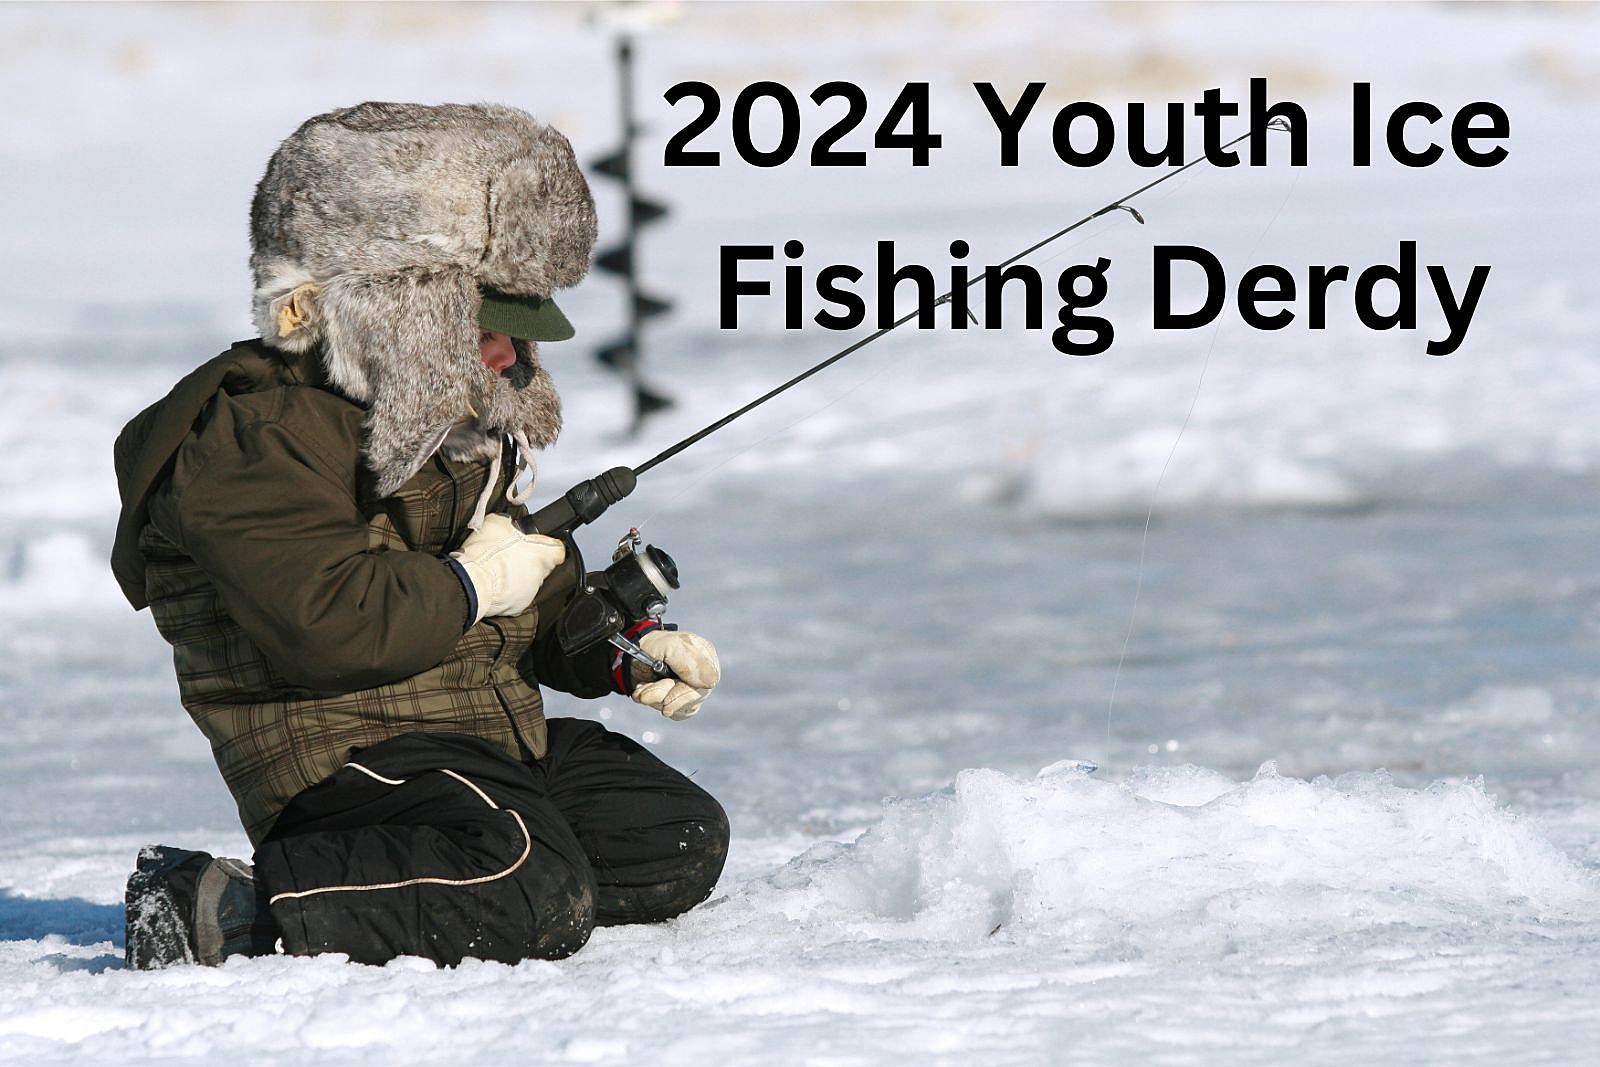 Exciting Family Activity Alert: Kids Ice Fishing Derby At Blacktail Dam